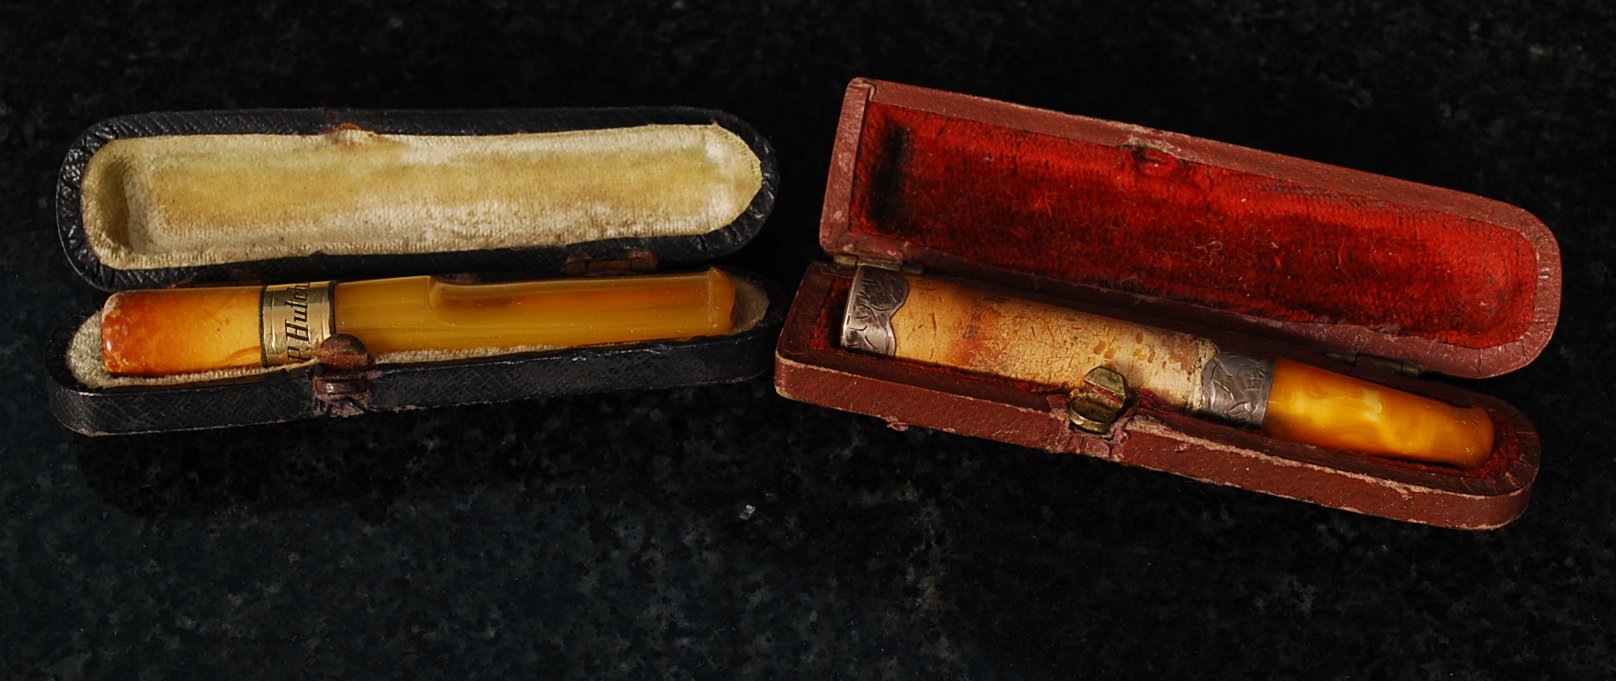 2 silver cigarette holders. 1 being amber and yellow metal, the other amber and white metal.